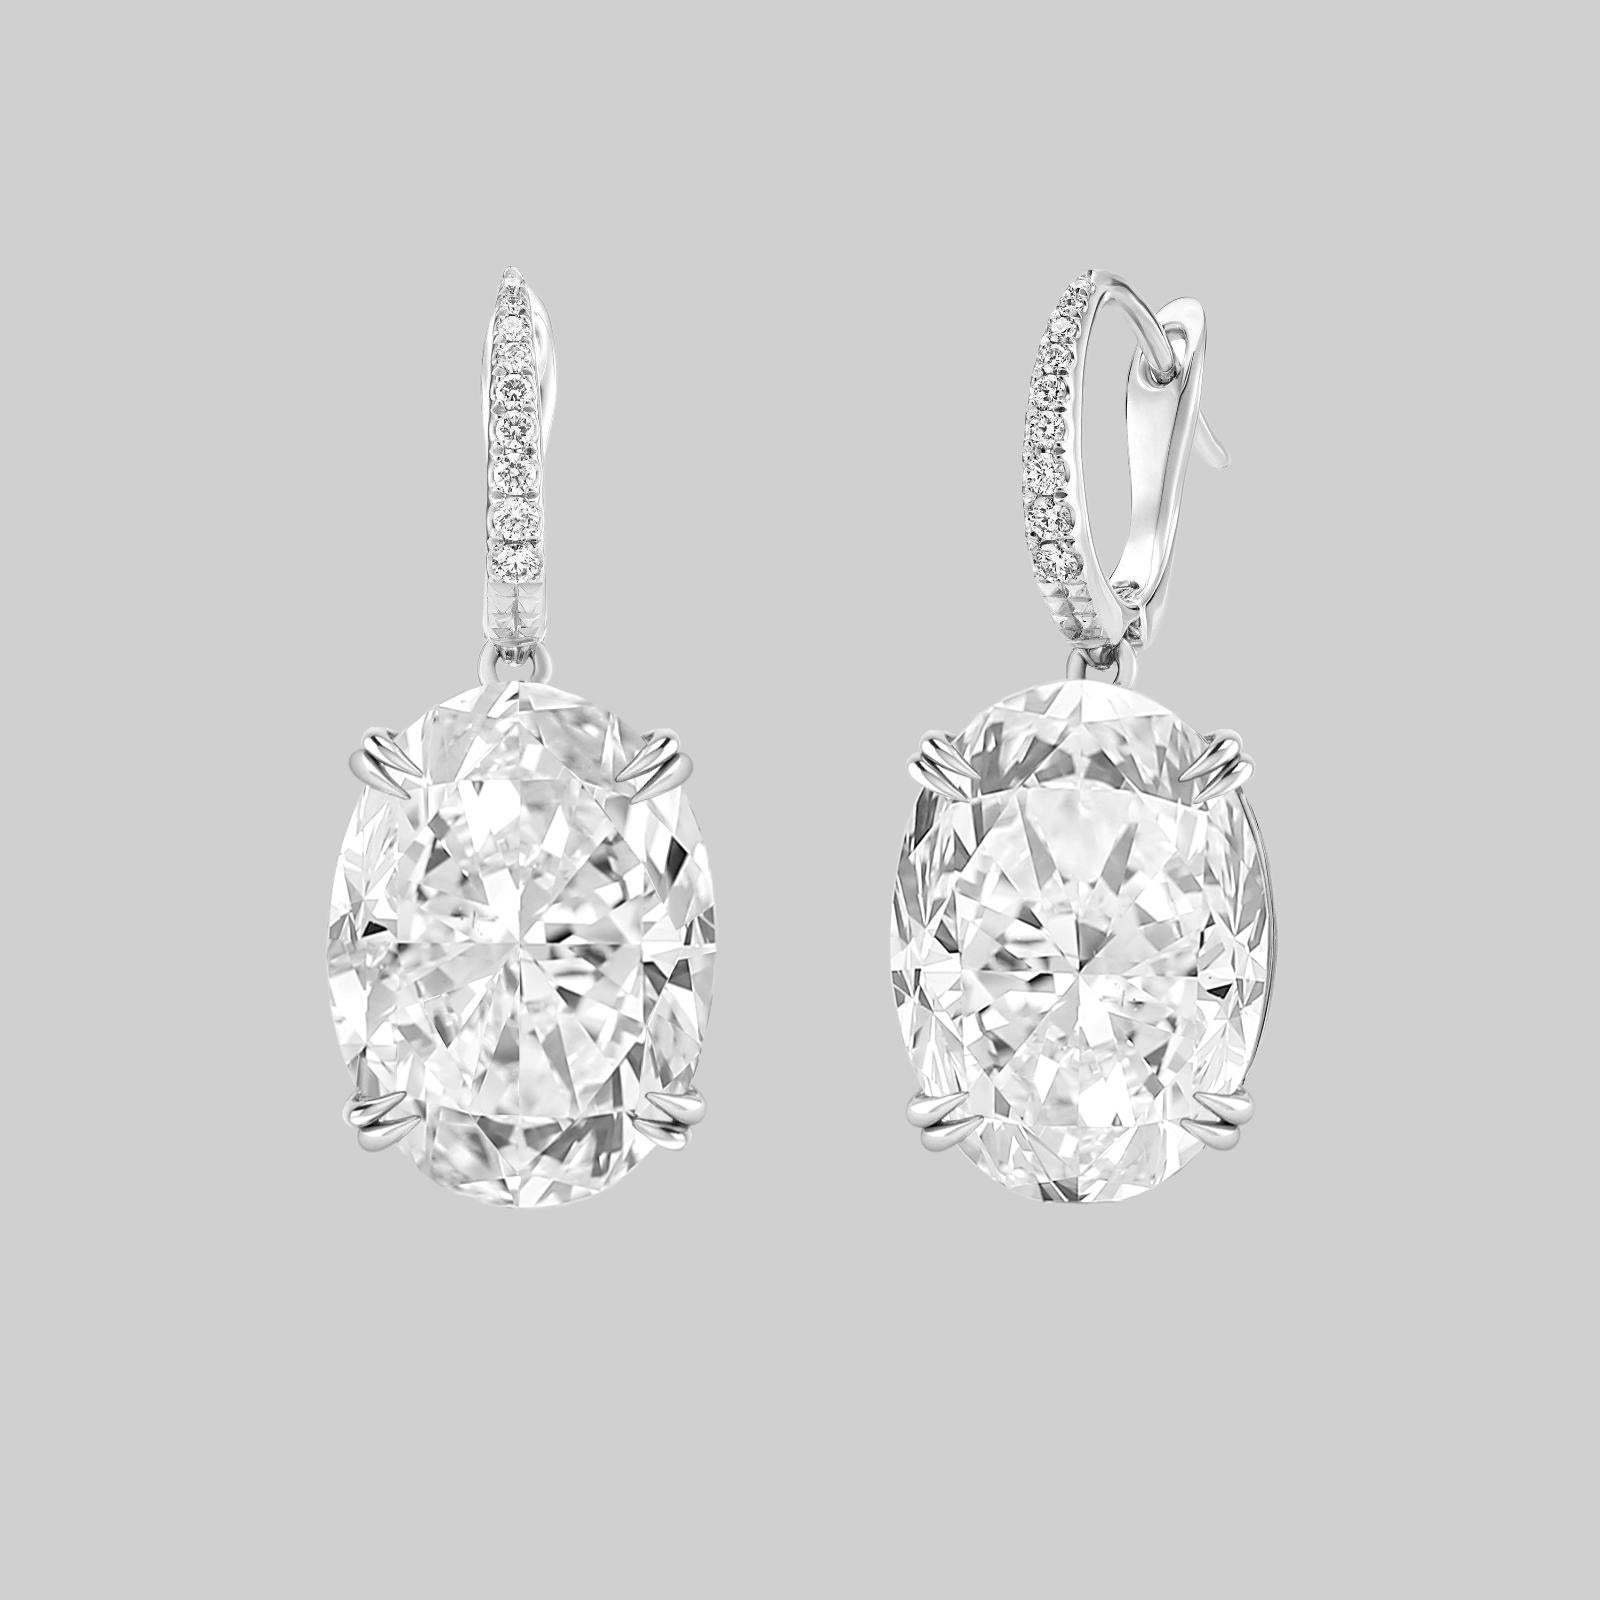 GIA Certified 6.61 Carat Oval Diamond Dangle Platinum Earrings.

Crafted with unparalleled attention to detail, these exquisite earrings are a true masterpiece of elegance and refinement. Each earring features a stunning GIA Certified 6.61 Carat